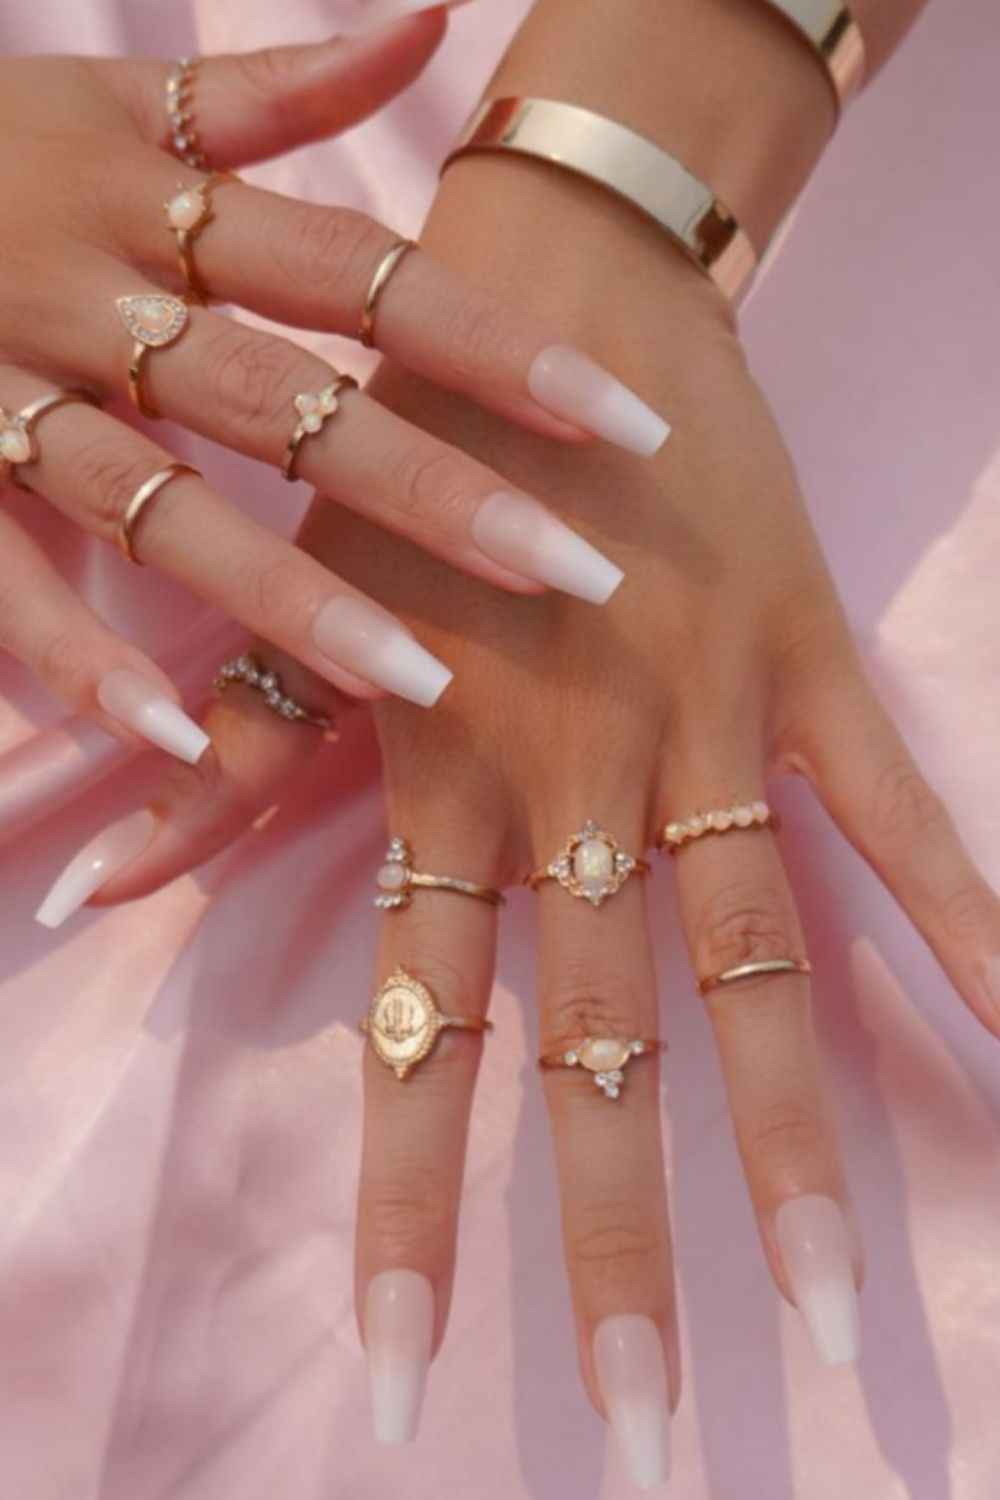 white coffin nails design  for woman